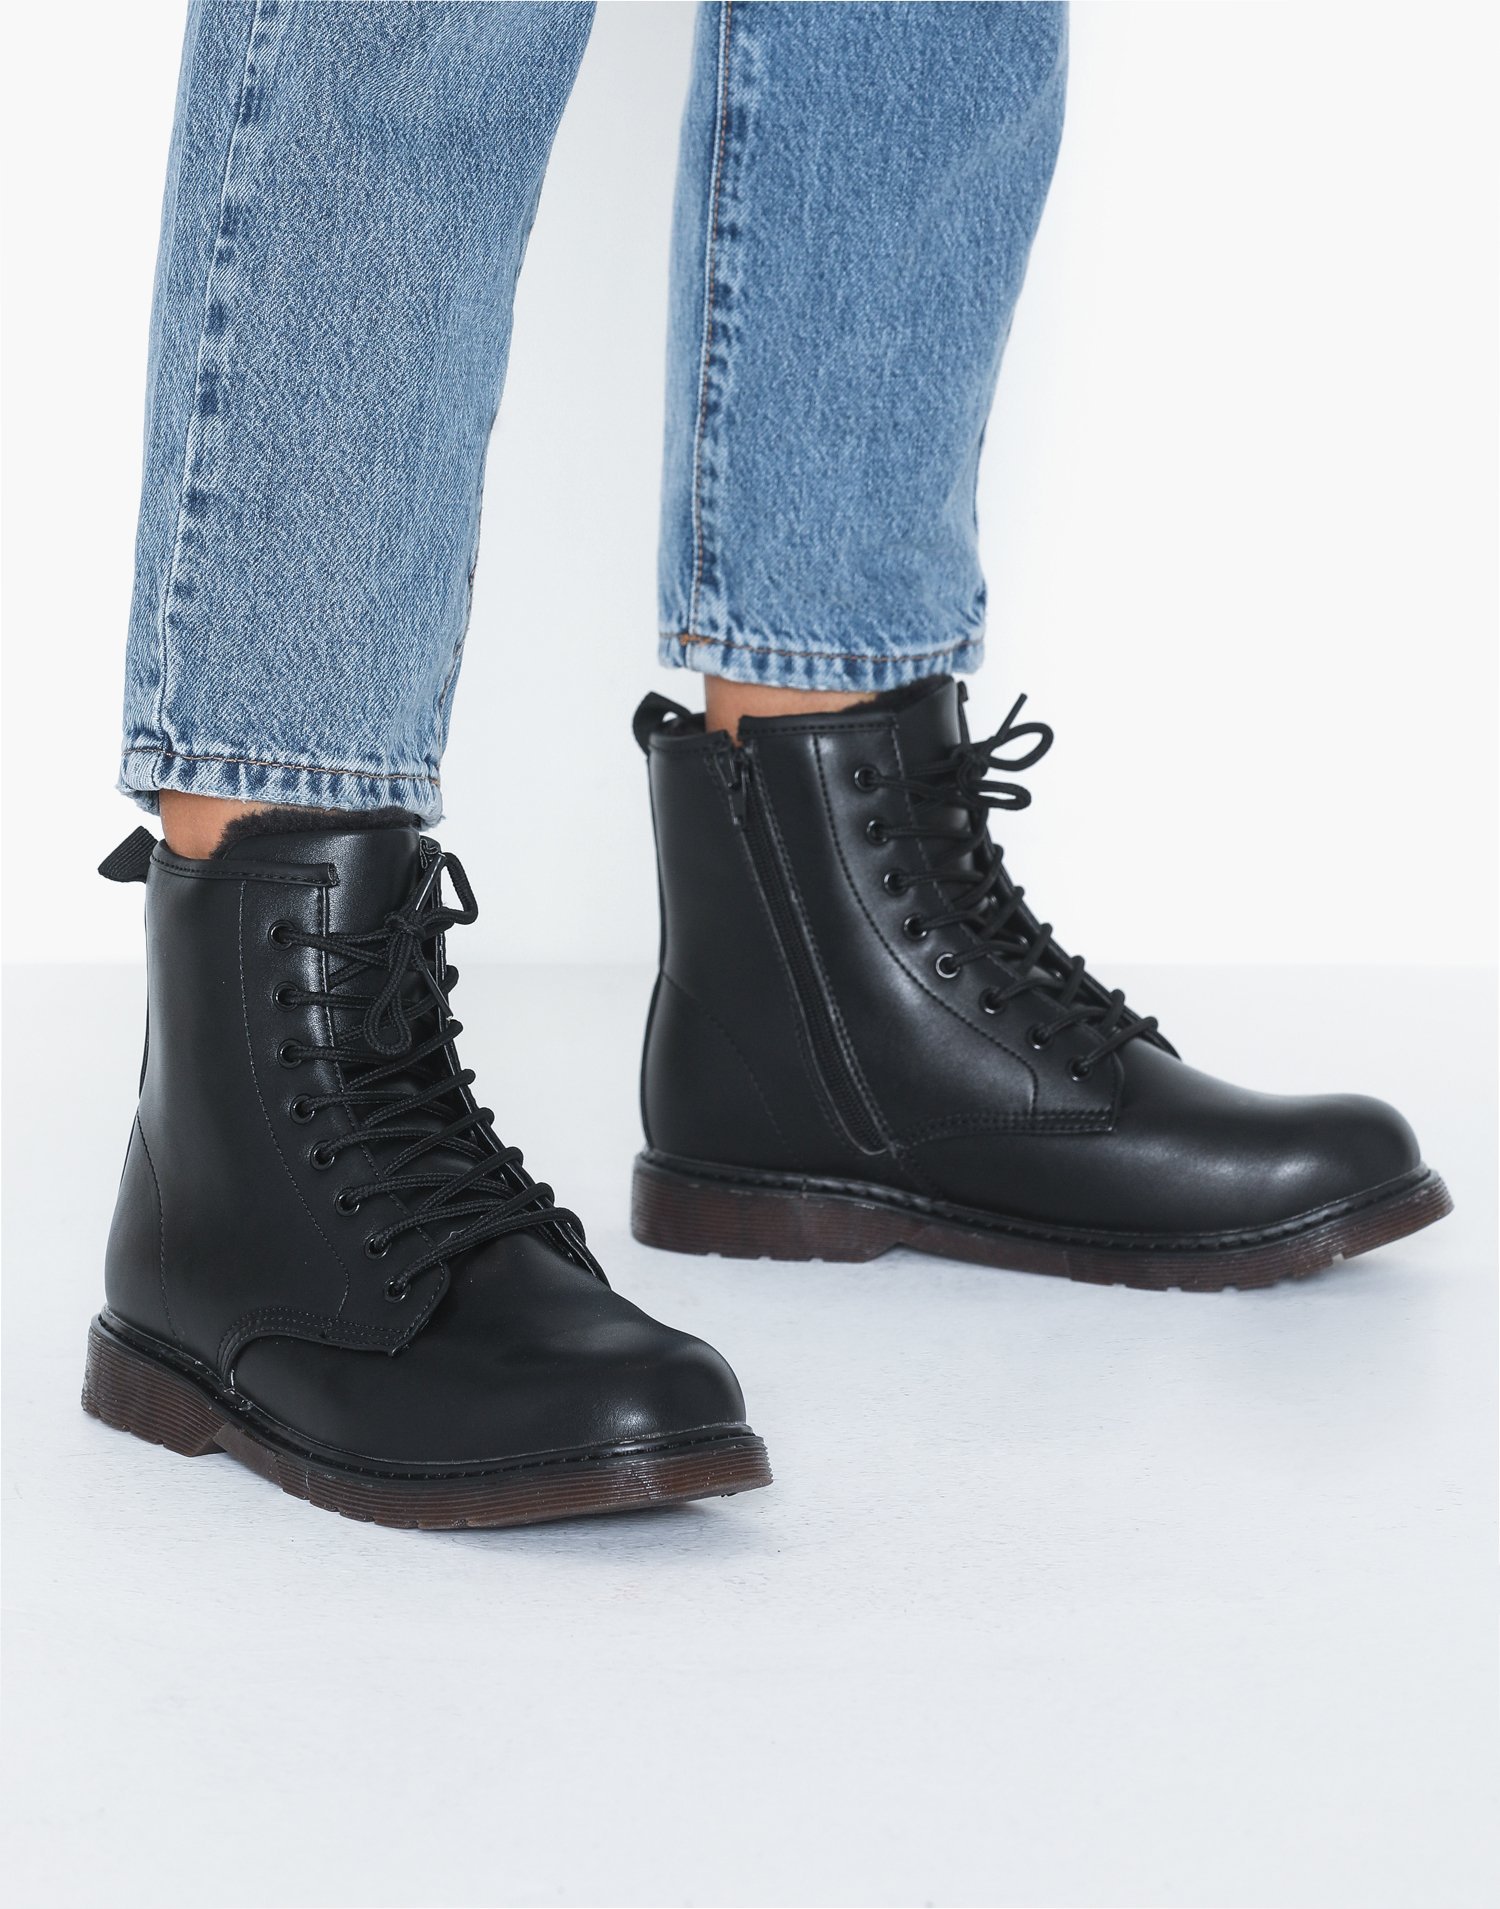 warm lace up boots